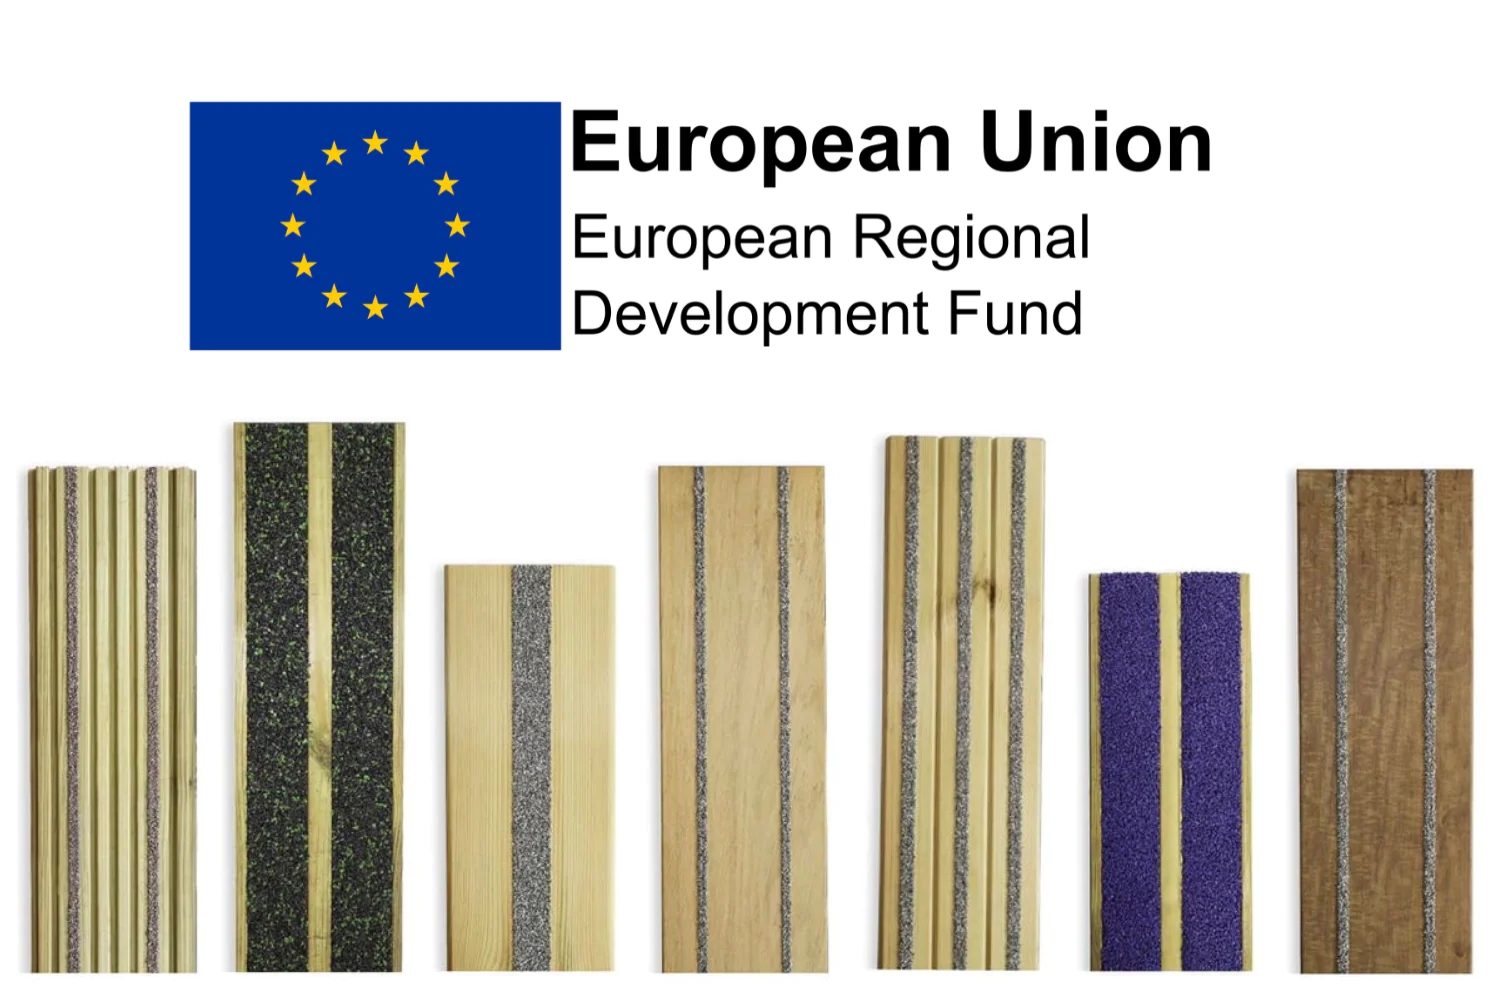 Non-slip decking supported by European Union funding